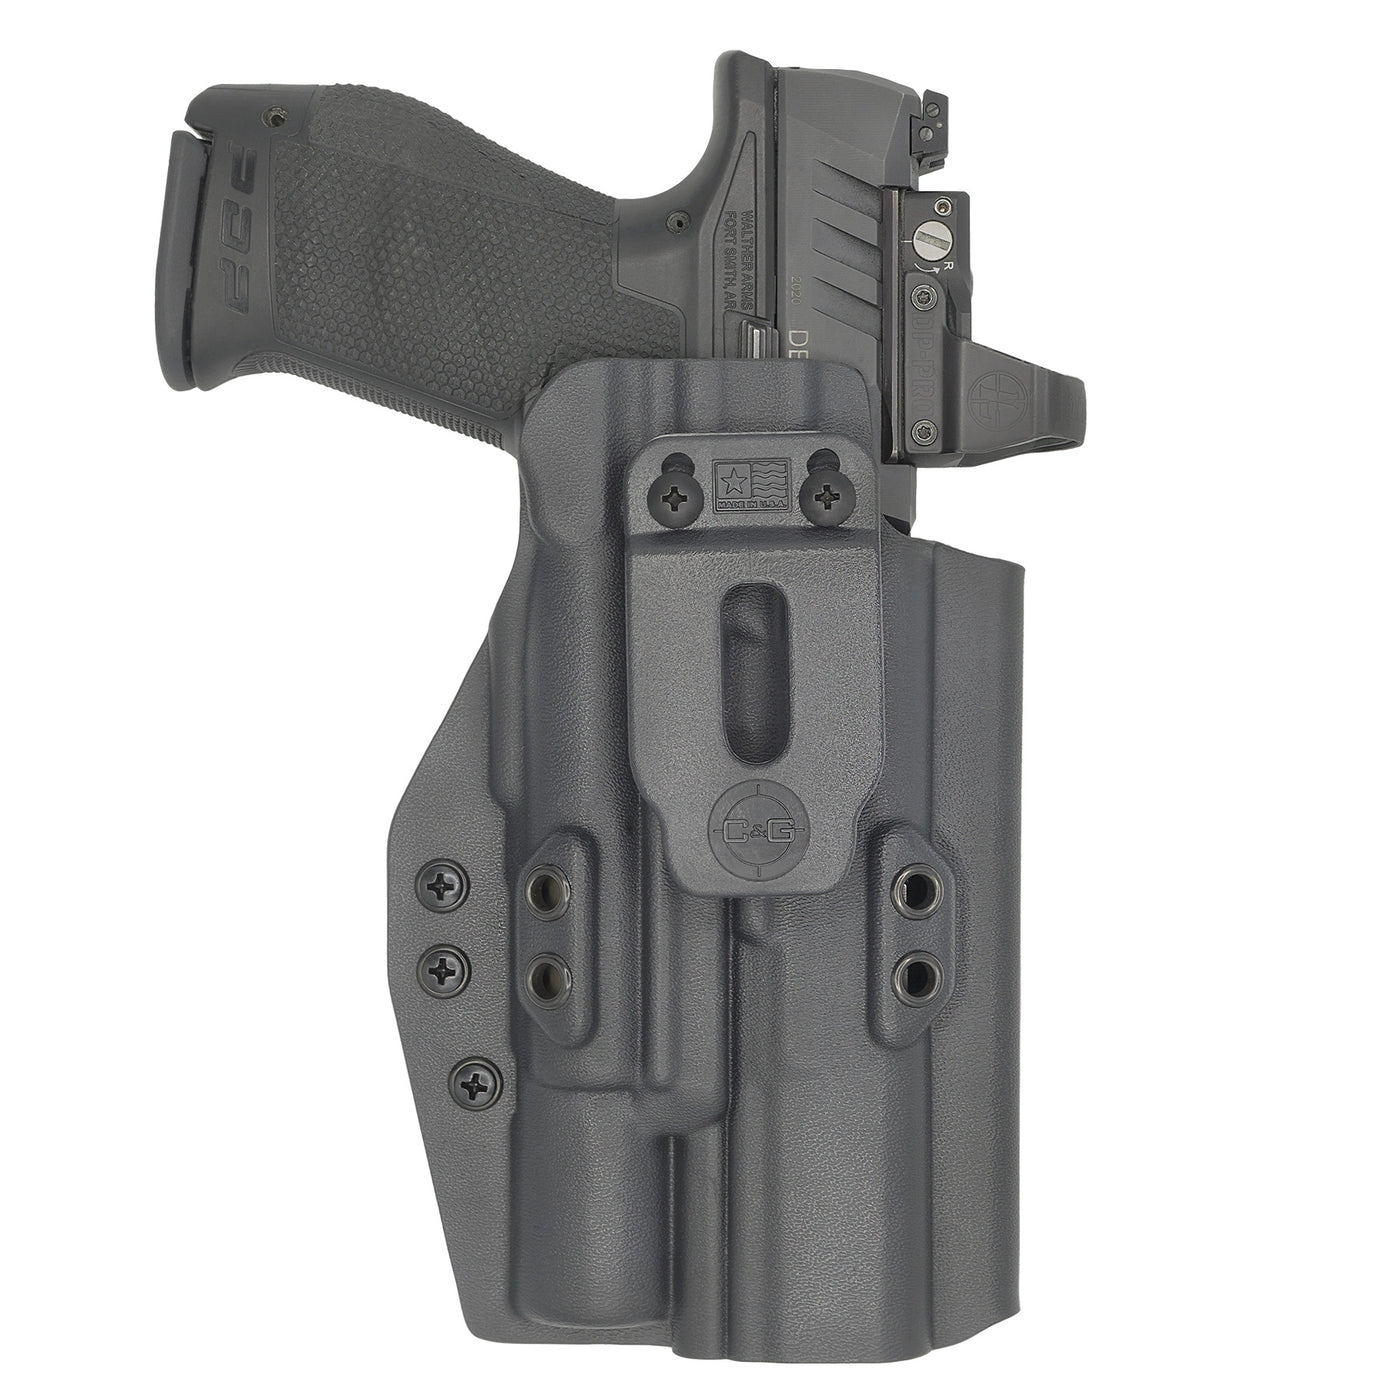 C&G Holsters custom IWB Tactical H&K P30 Surefire X300 in holstered position